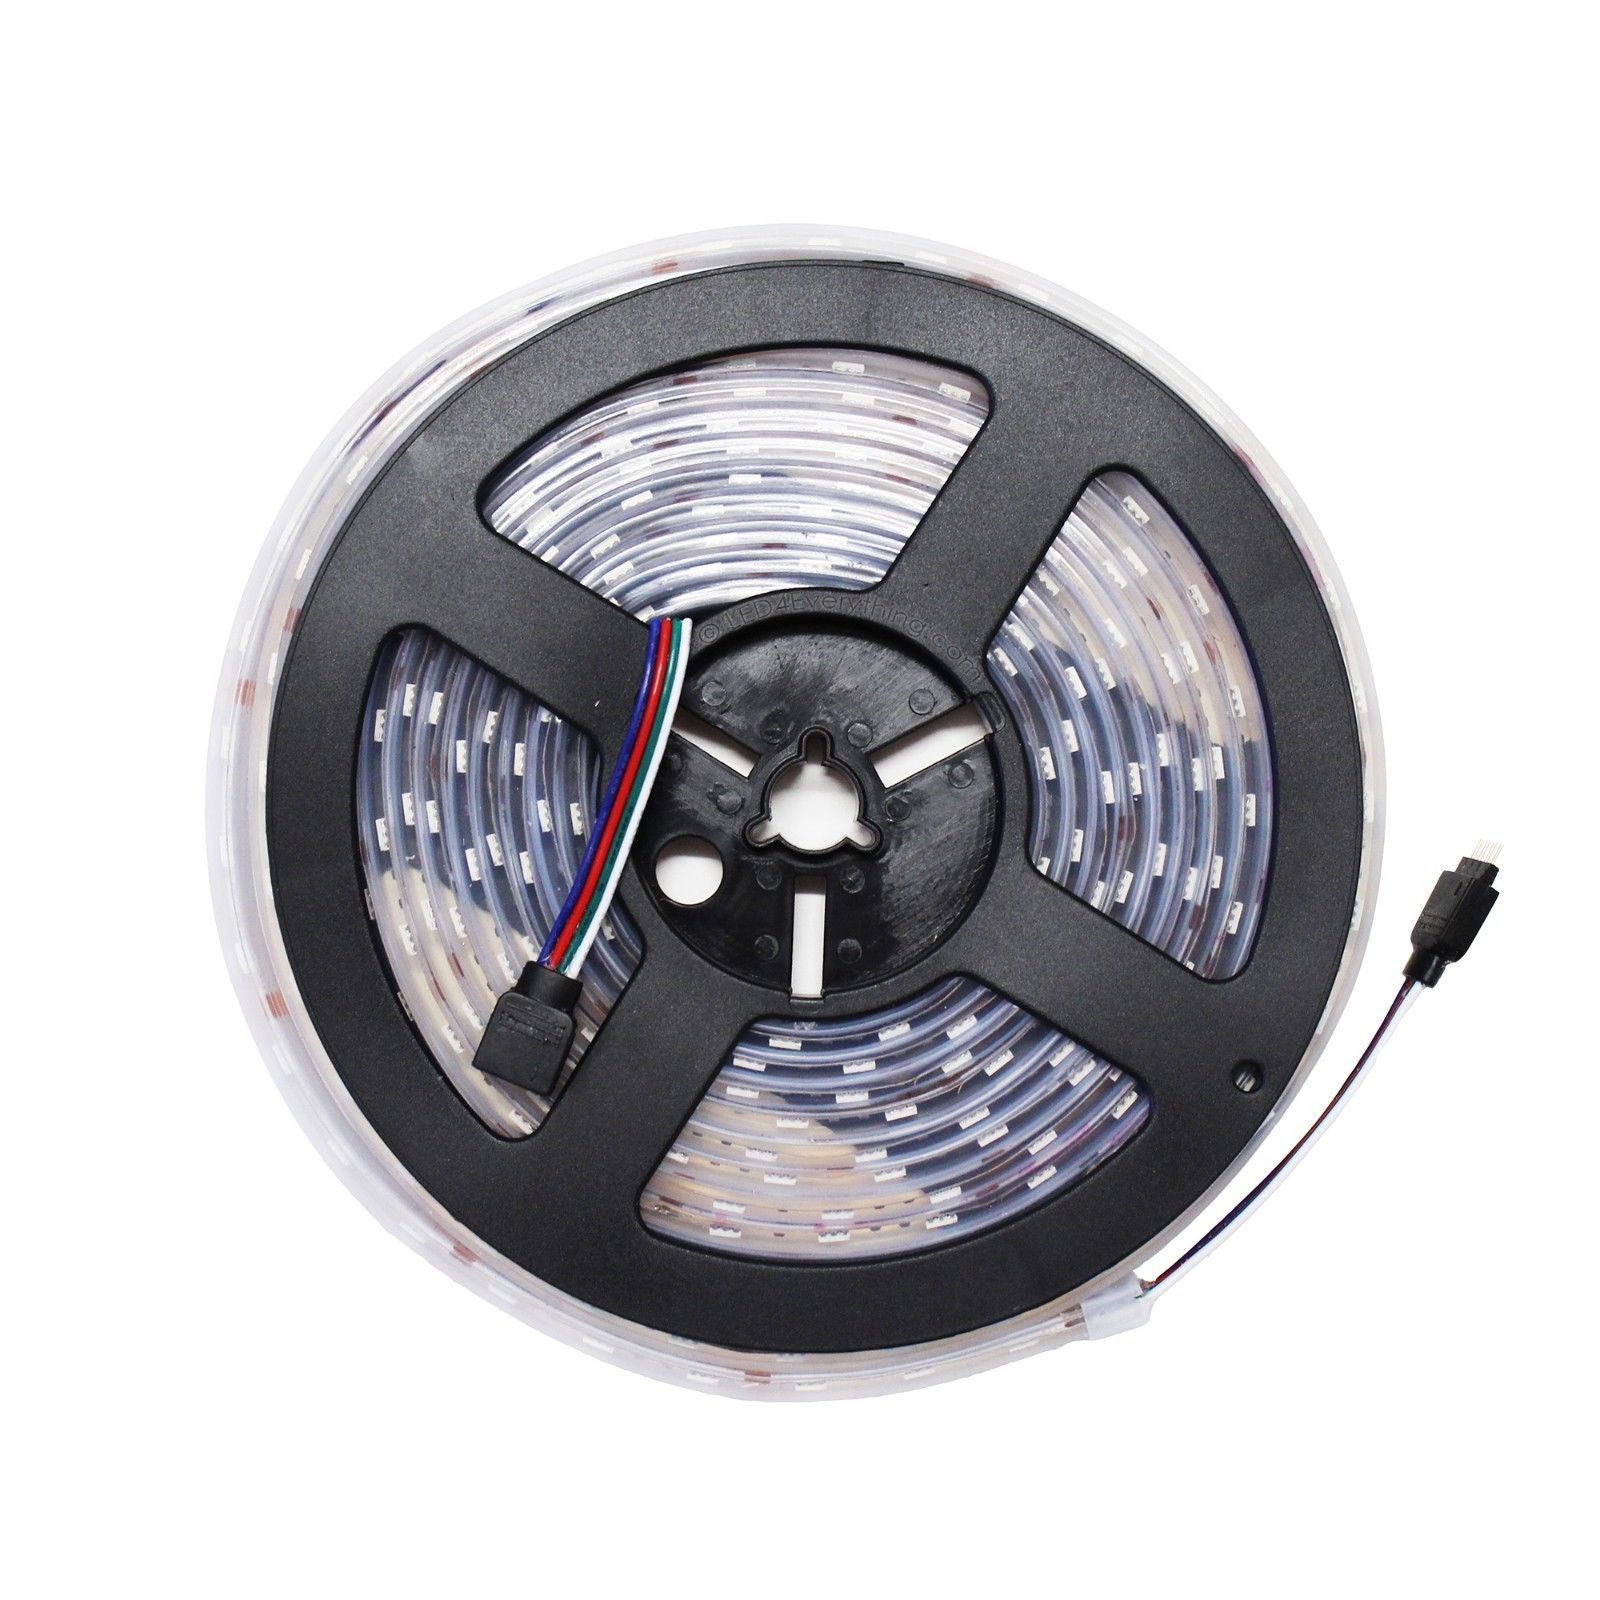 Details about   5M/16.4ft Flexible Dimmable LED Strip Light 5050 SMD 300 leds Outdoor Lamp 12V 